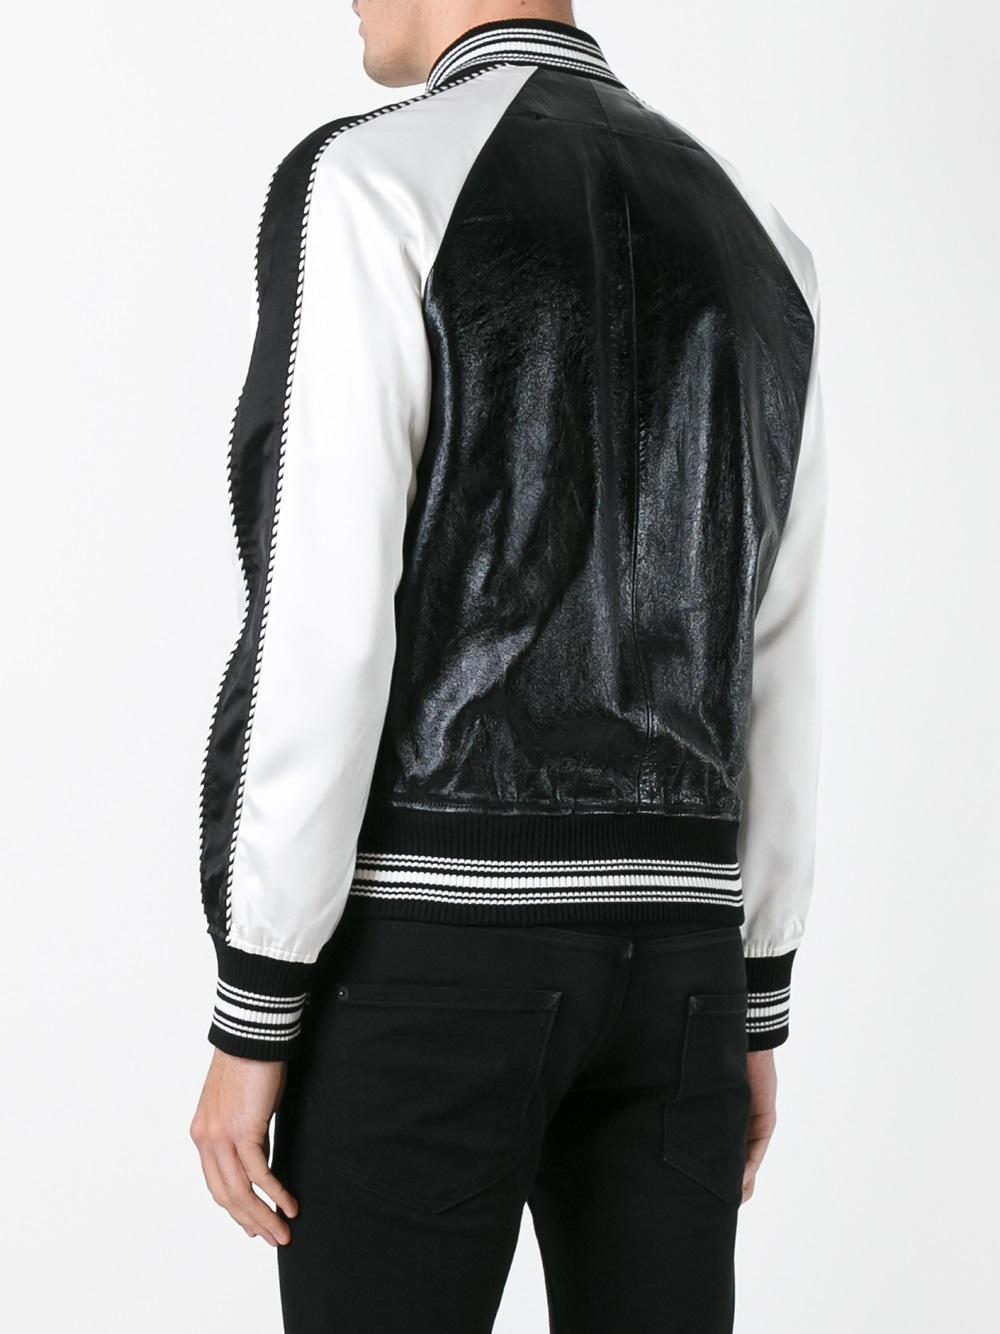 Lyst - Givenchy Monochrome Bomber Jacket in Black for Men